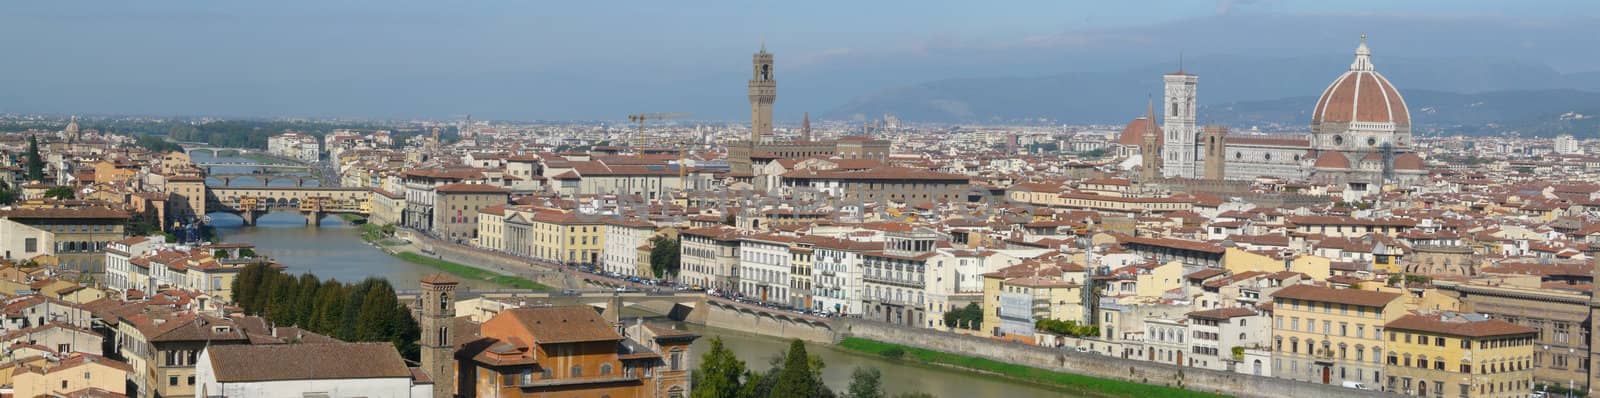 Wide-angle view on Florence, Italy, including cathedral and ponte vecchio.